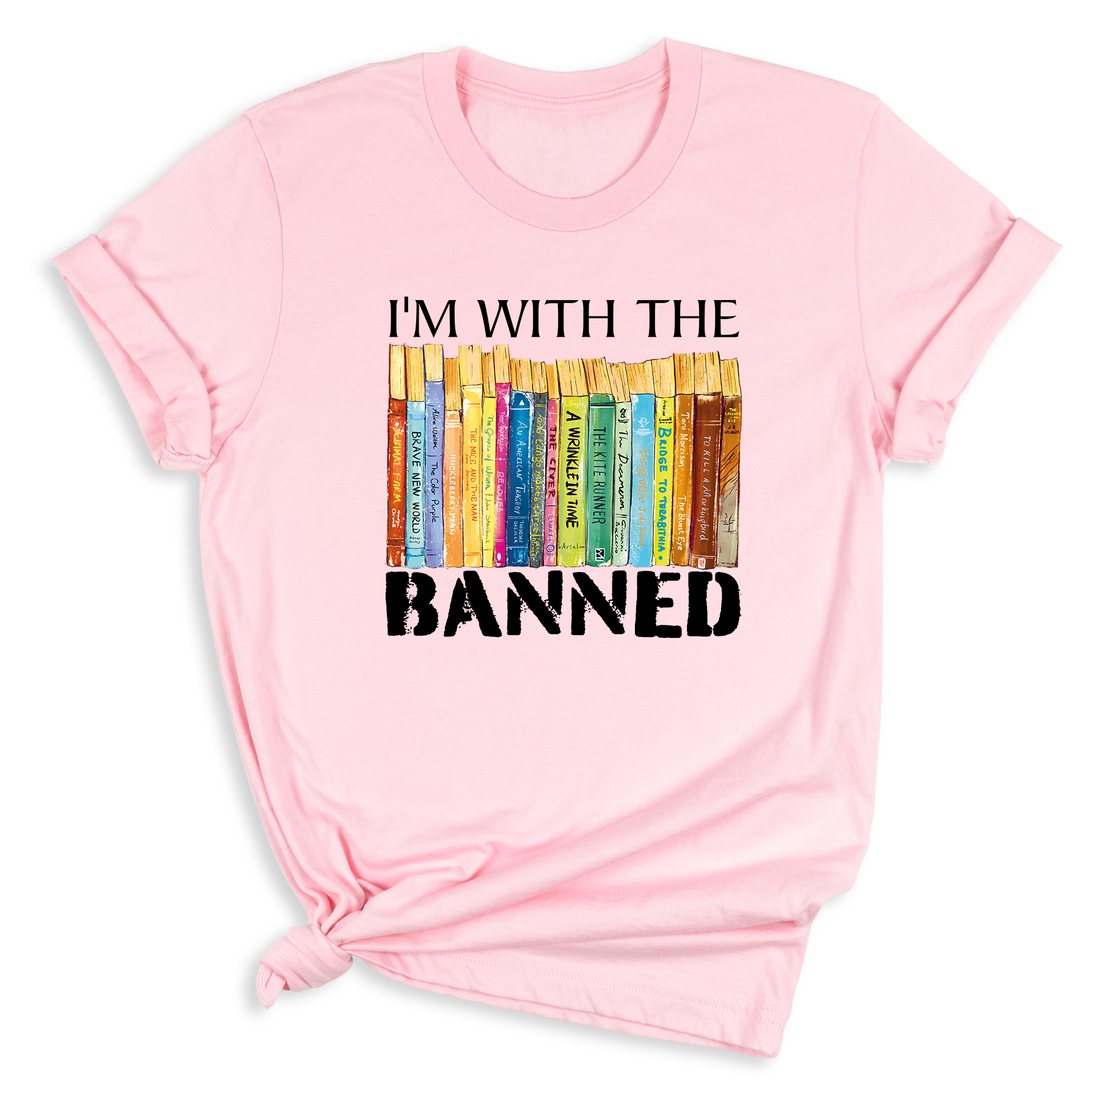 i'm with the banned shirts understanding